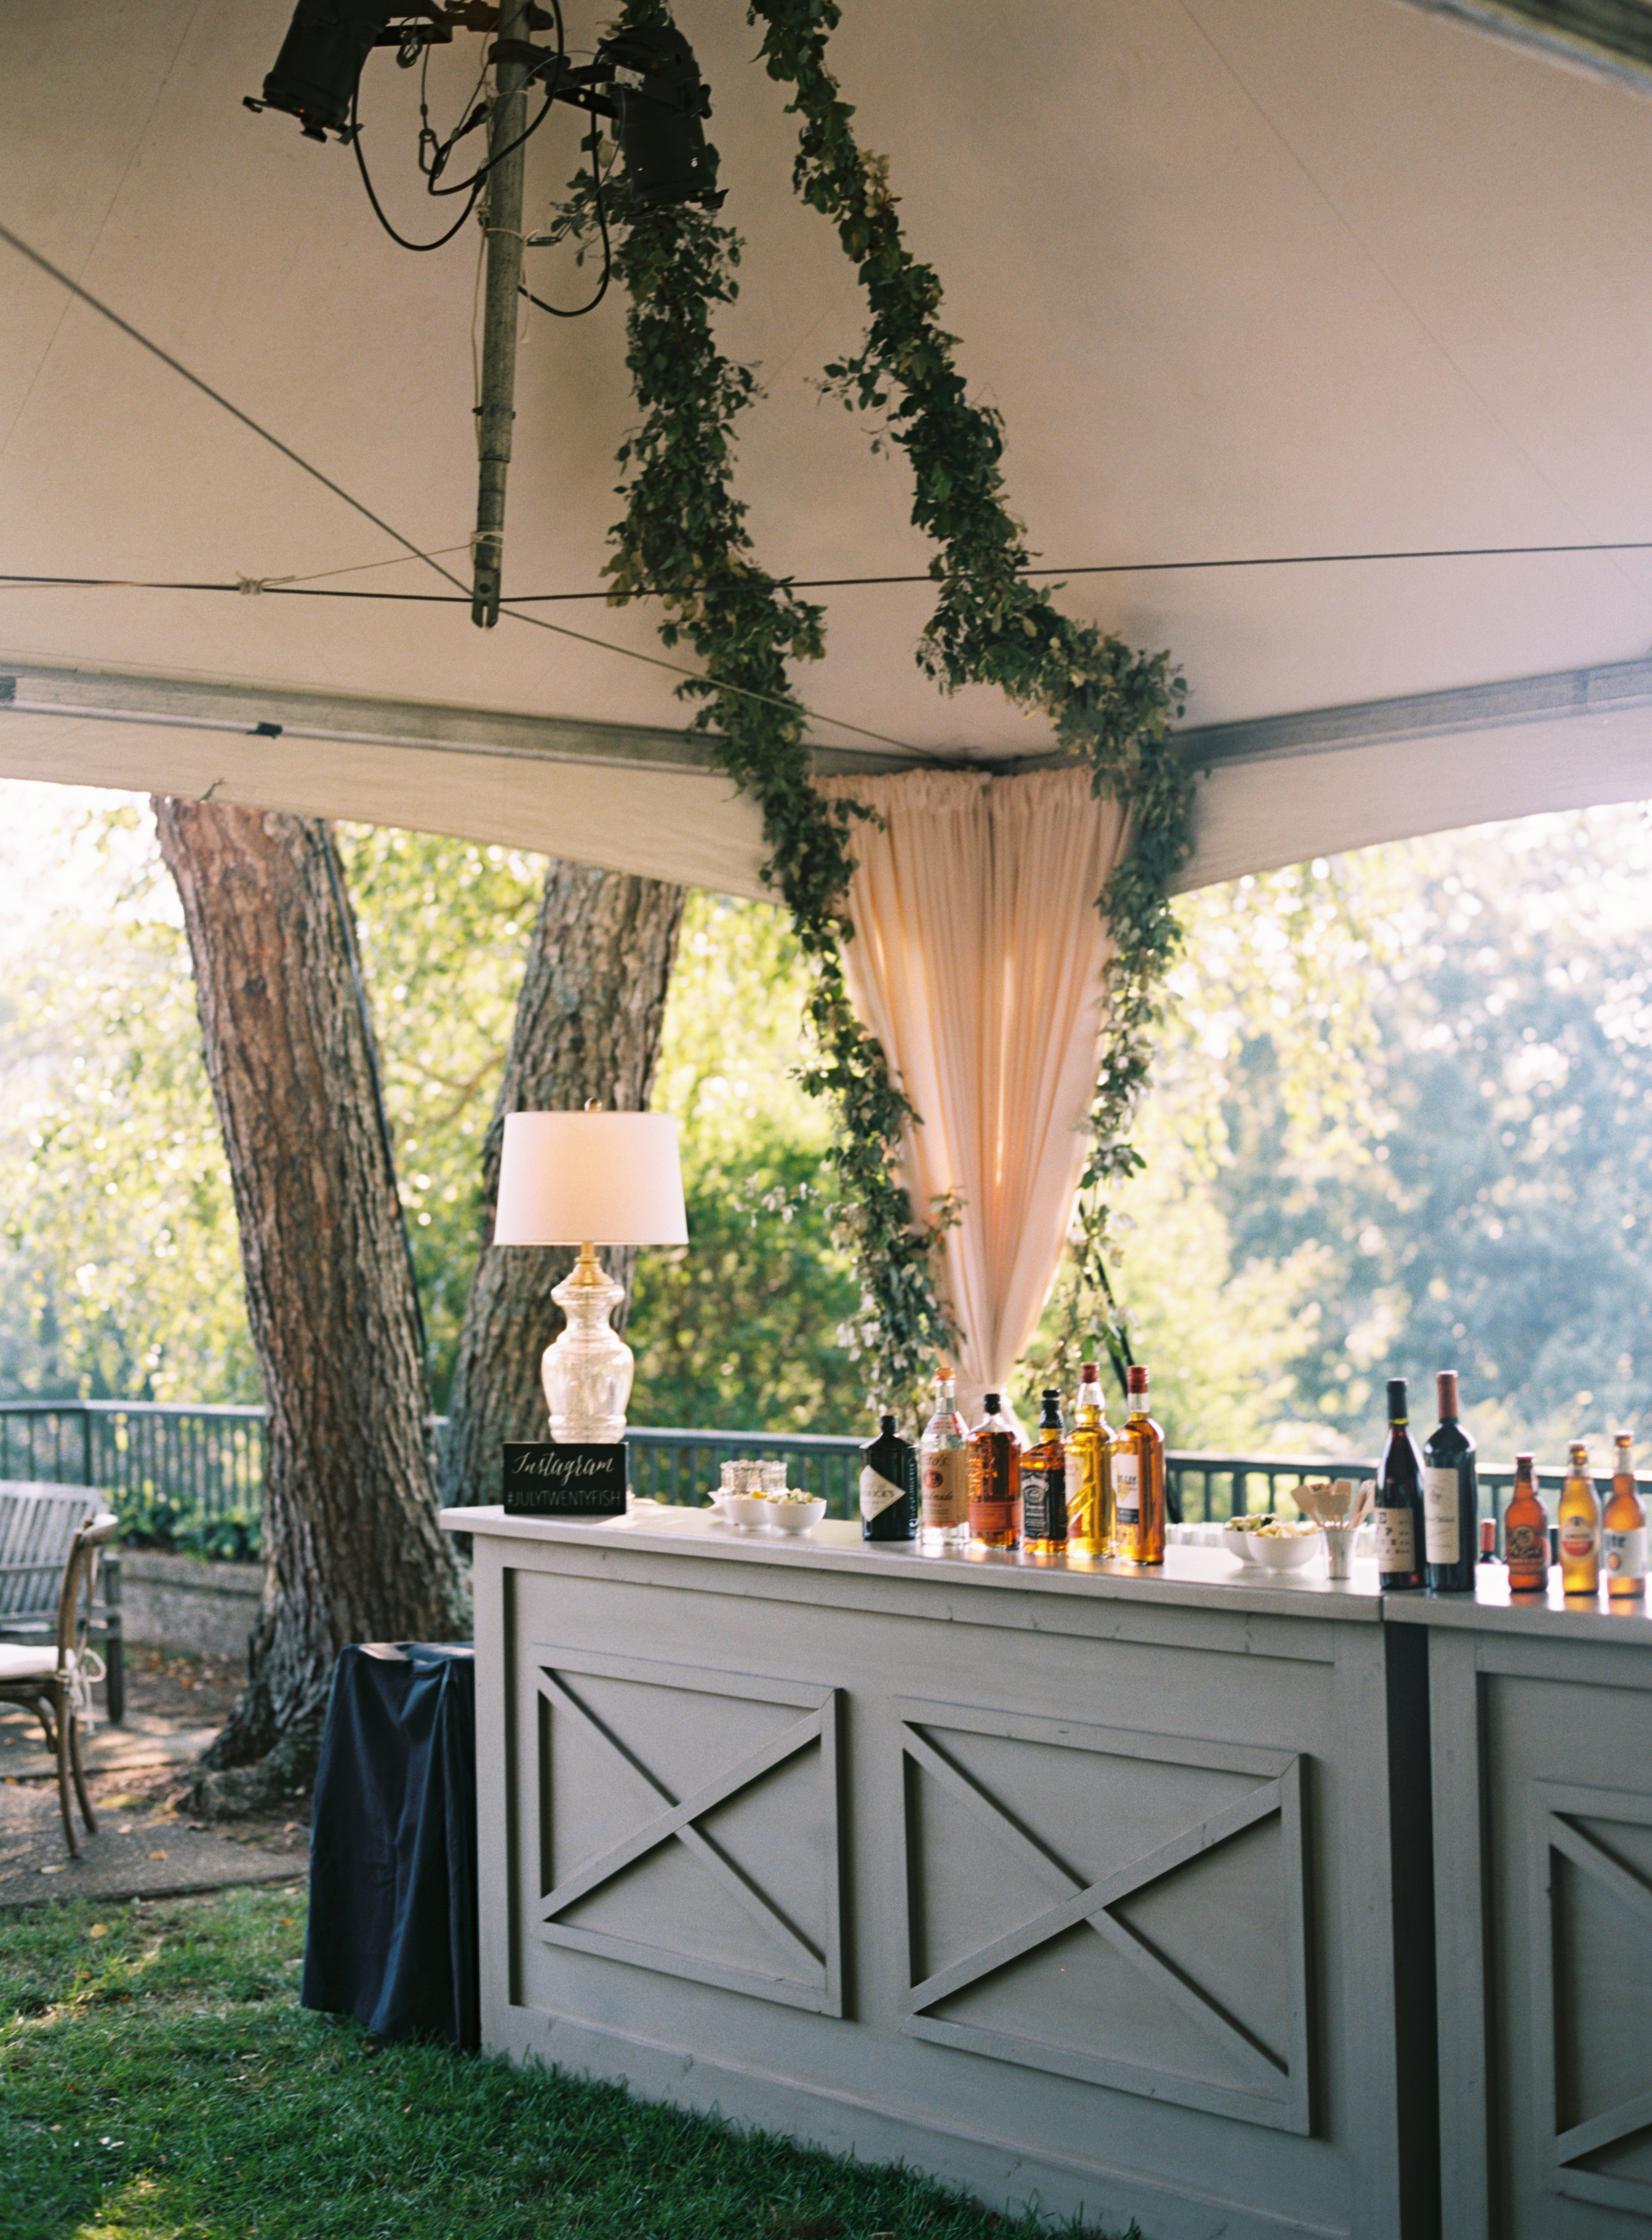 Tent with Garlands of Greenery // Belle Meade Wedding Floral Design